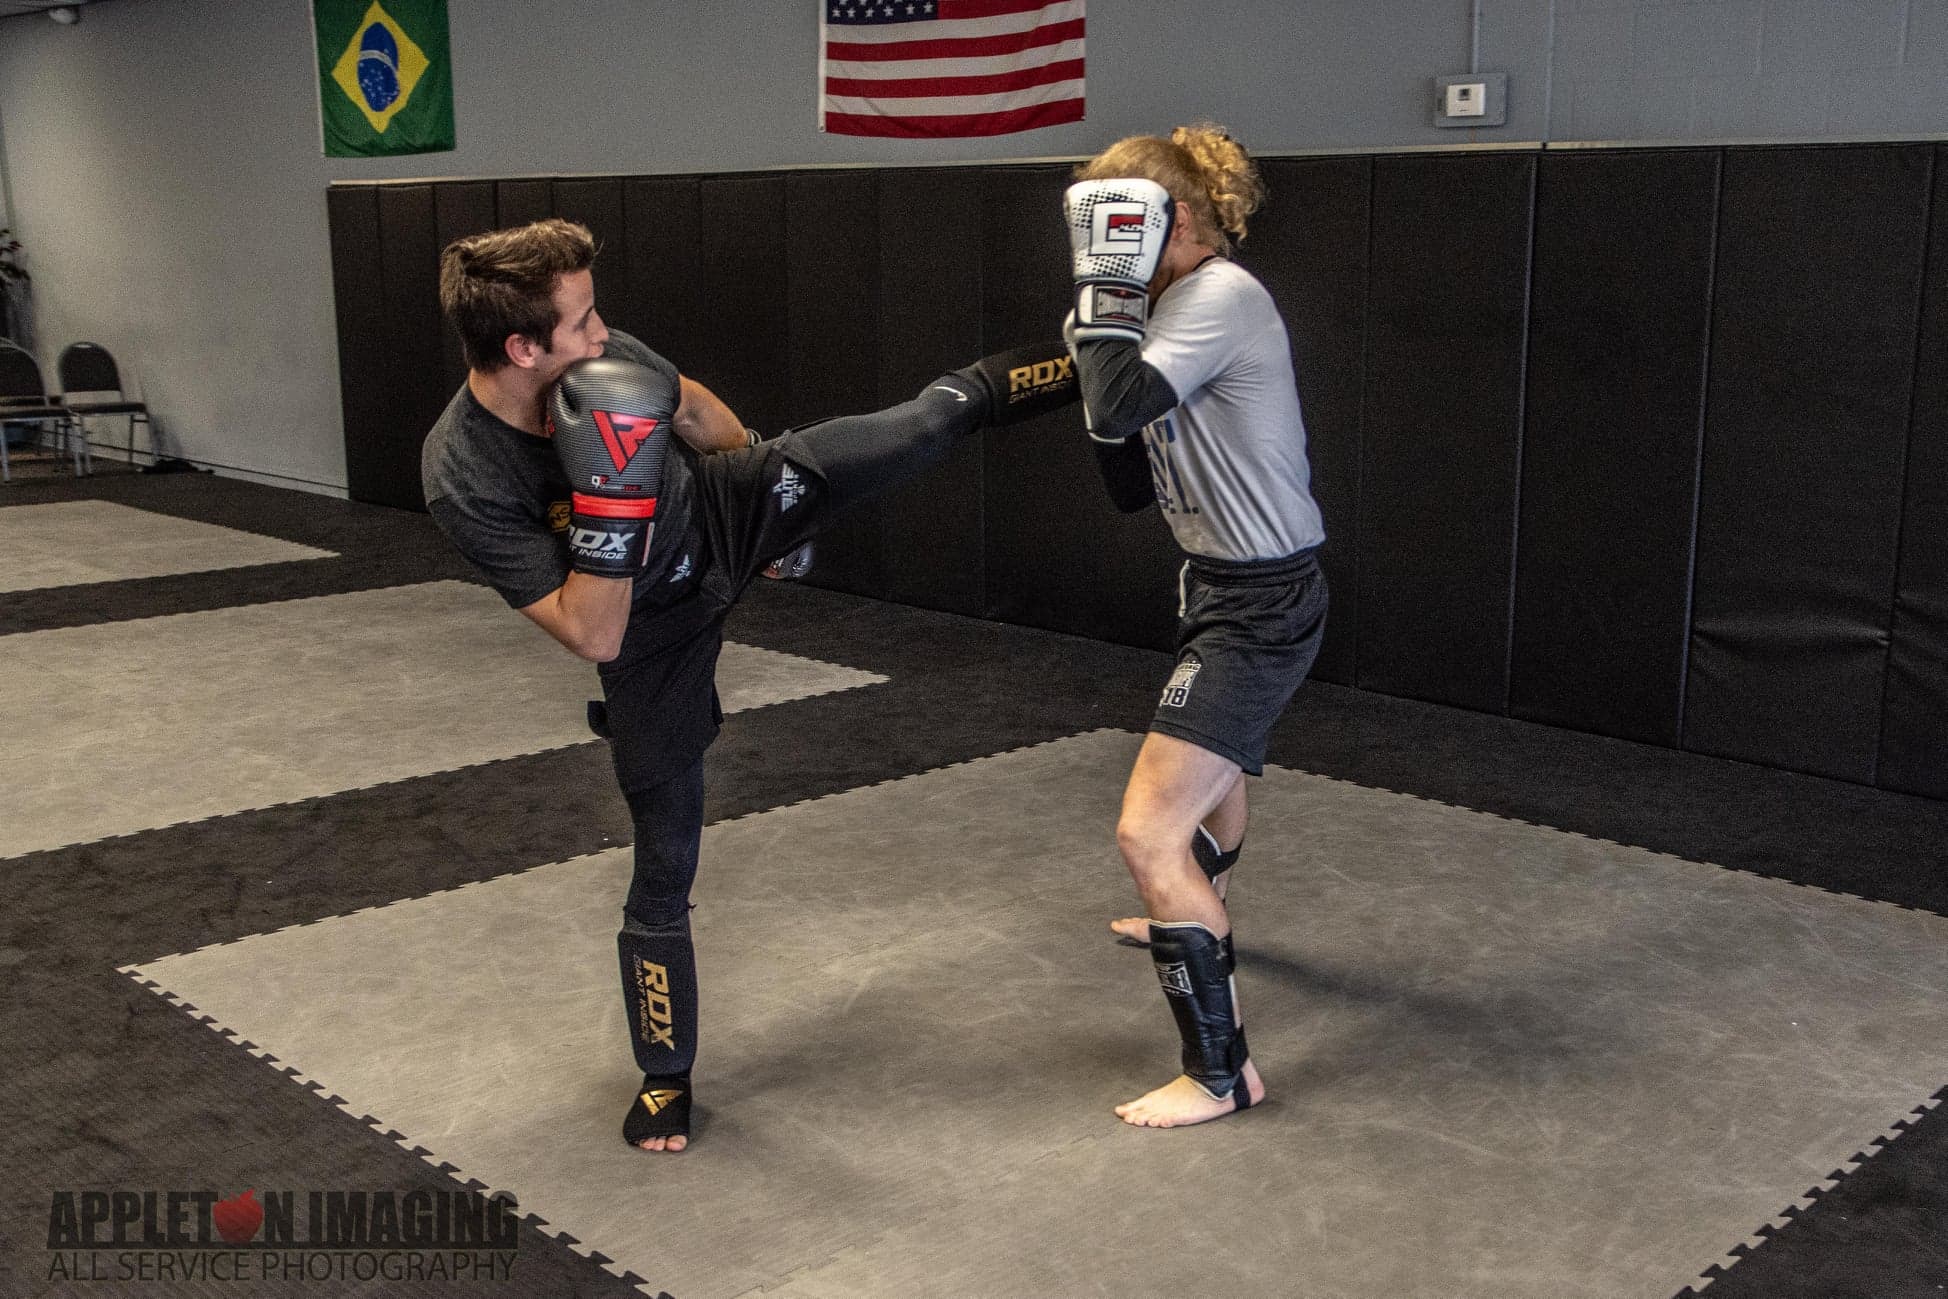 Two Students Sparring